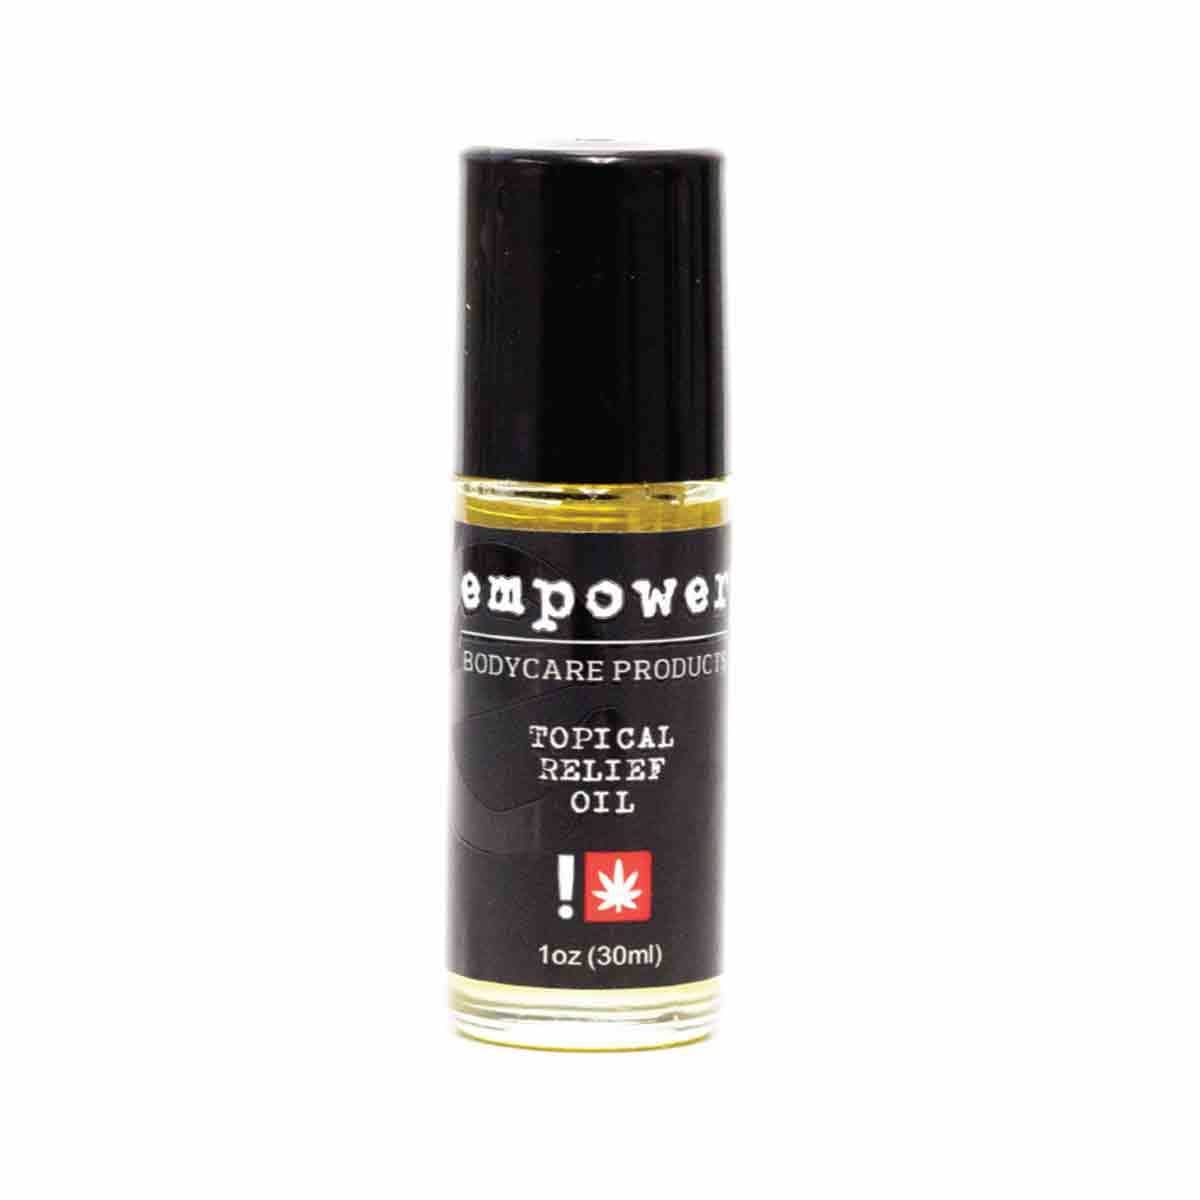 topicals-empower-empowerar-topical-relief-oil-black-label-30ml